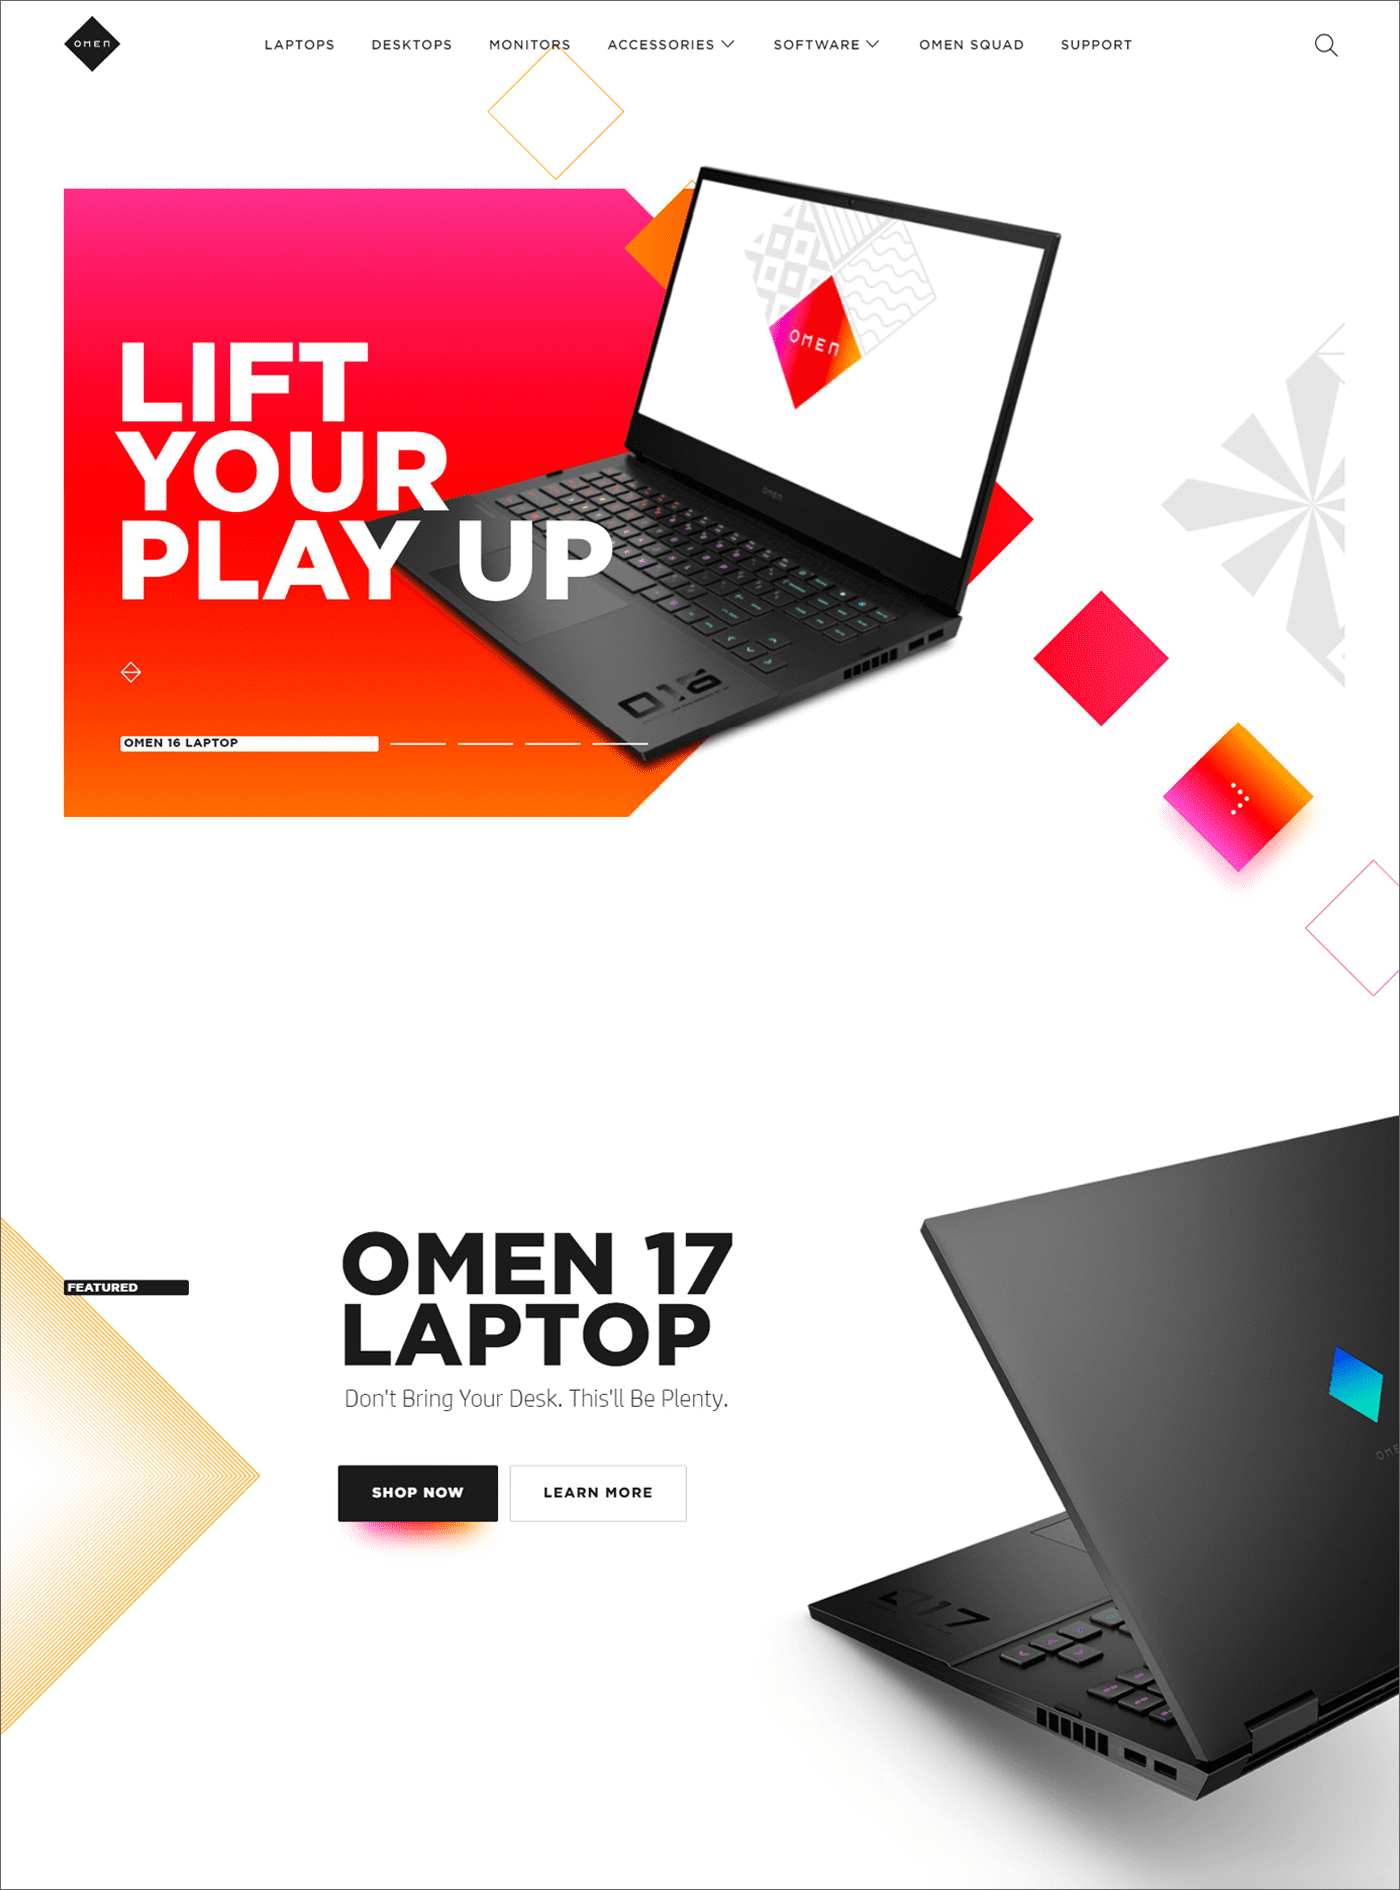 OMEN by HP gaming laptops